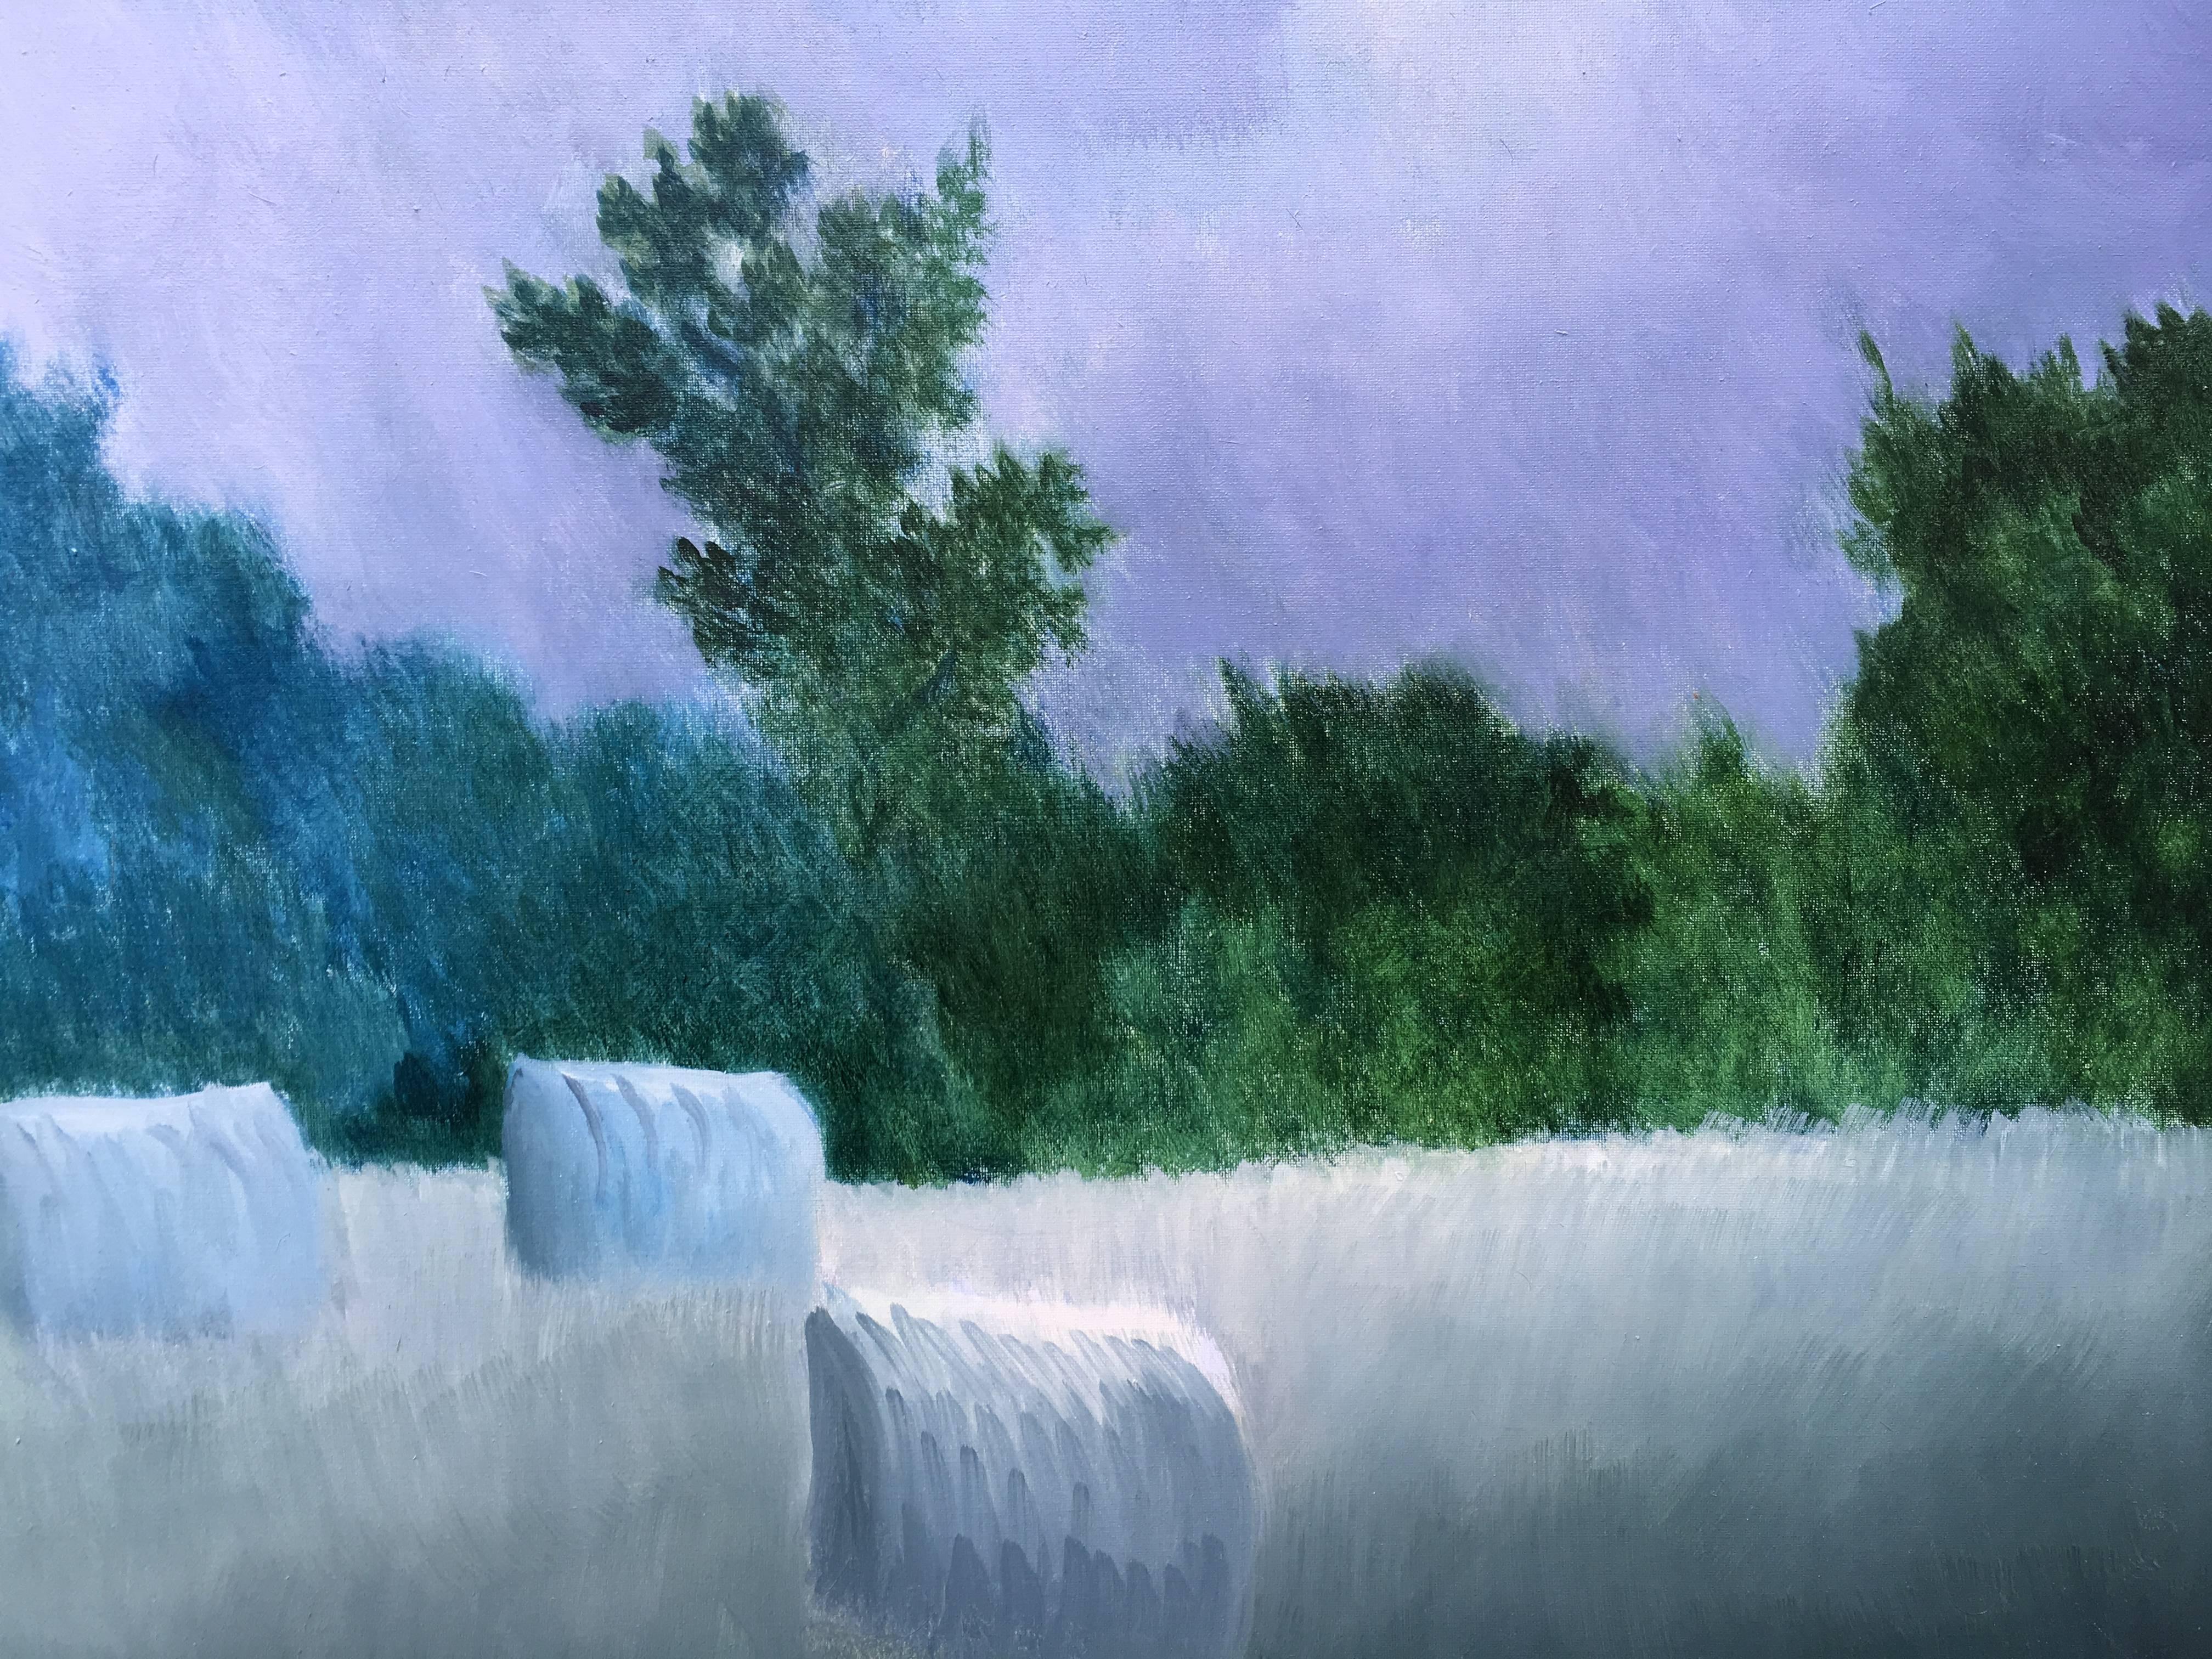 The three wheat bales - Painting by Sheila Querre